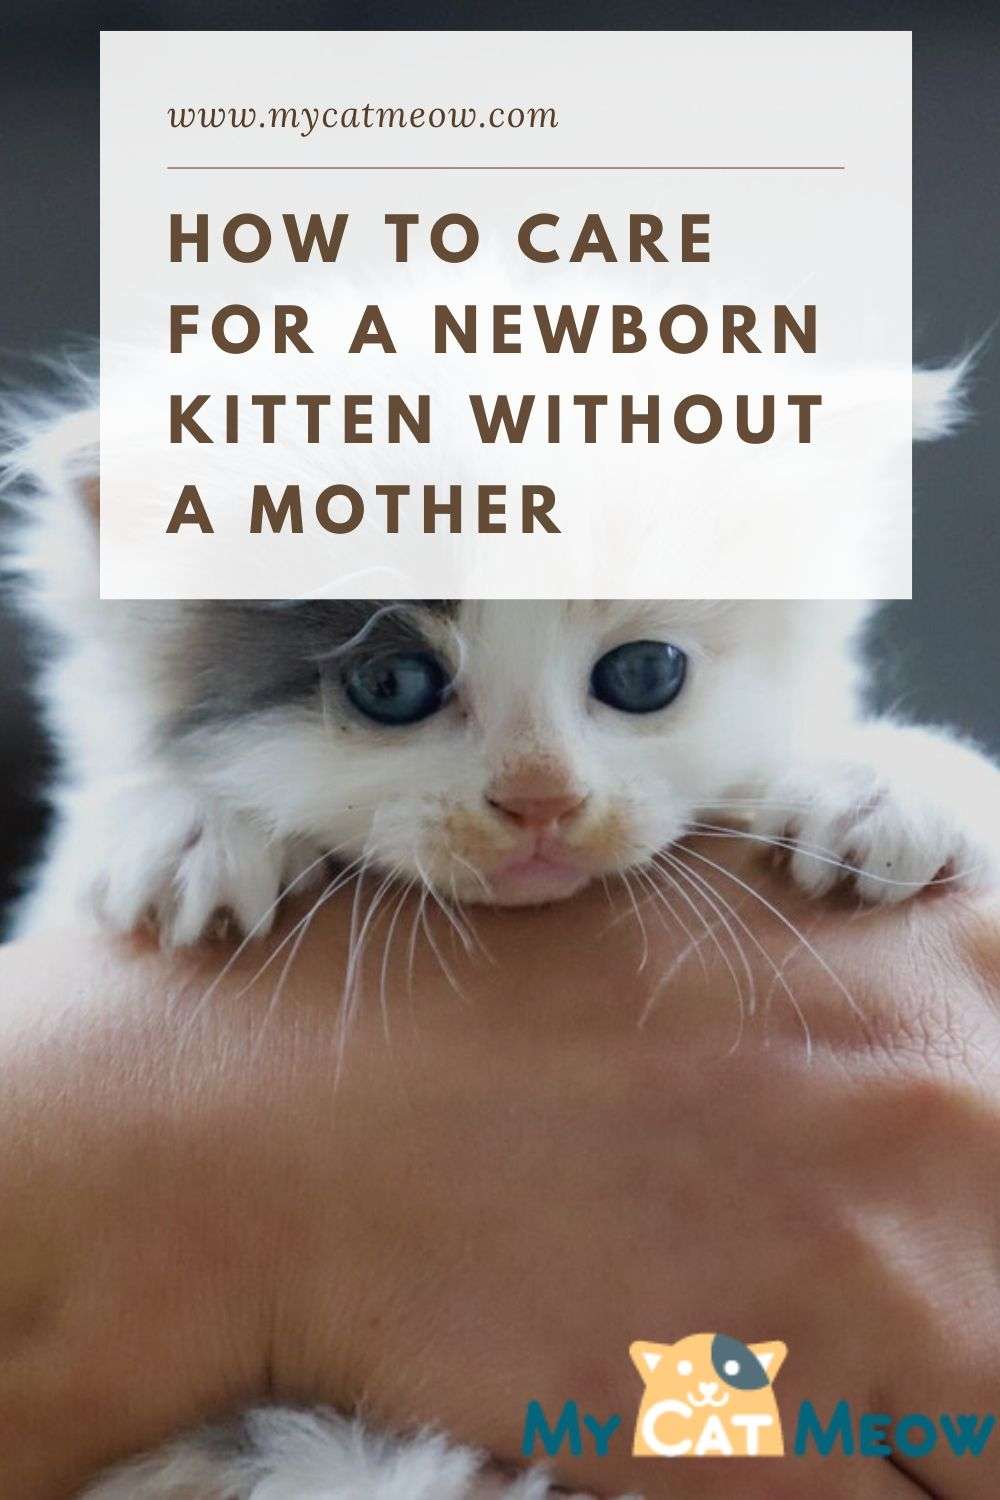 8 Best Ways to Care for a Newborn Kitten without Mother